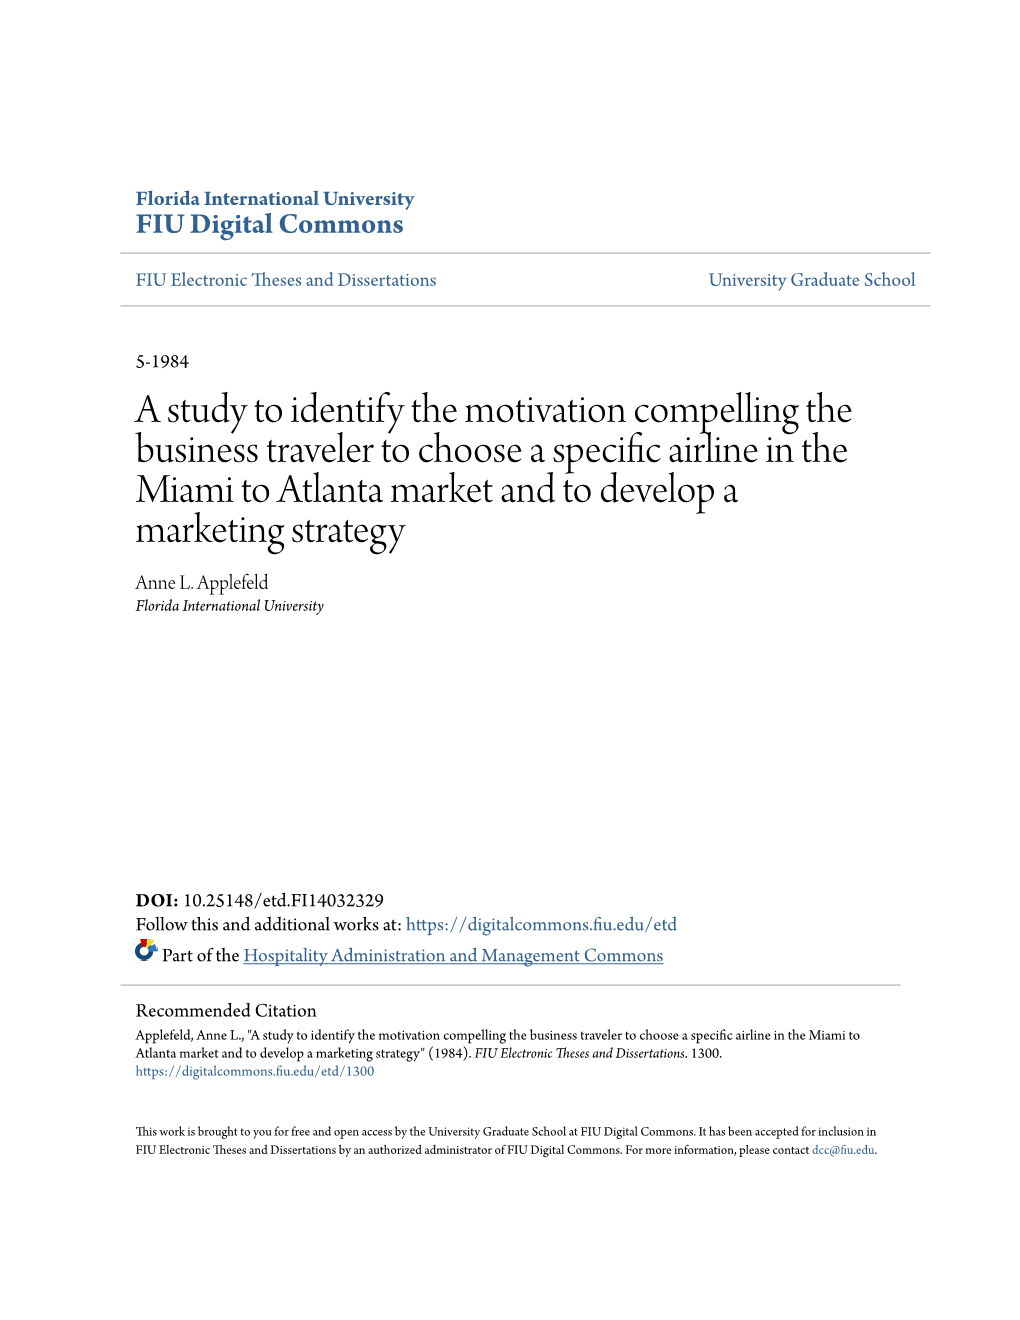 A Study to Identify the Motivation Compelling the Business Traveler to Choose a Specific Airline in the Miami to Atlanta Market